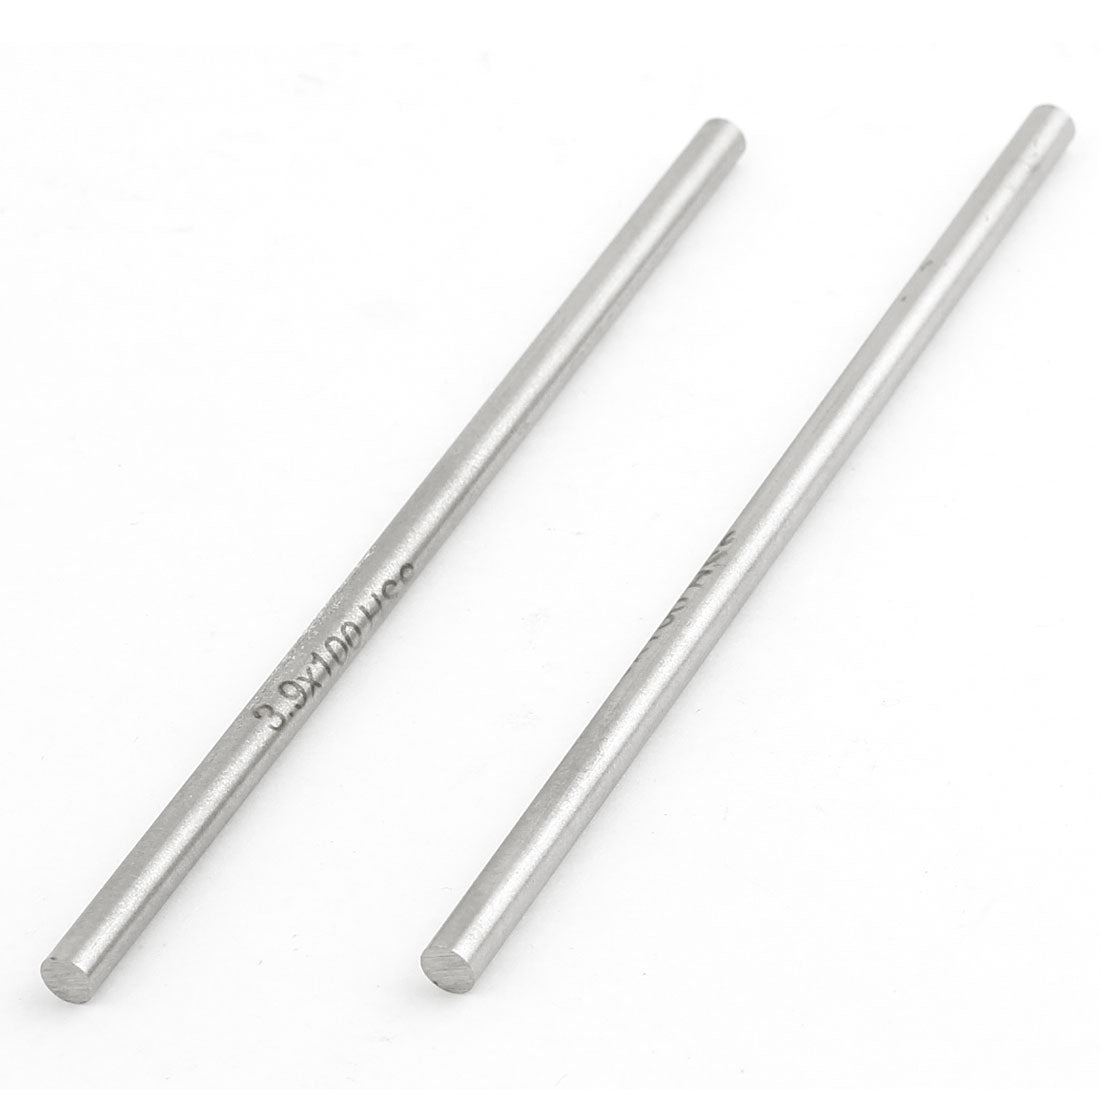 Uxcell Uxcell 2 Pcs HSS High Speed Steel Round Turning Lathe Bars 4mm x 100mm